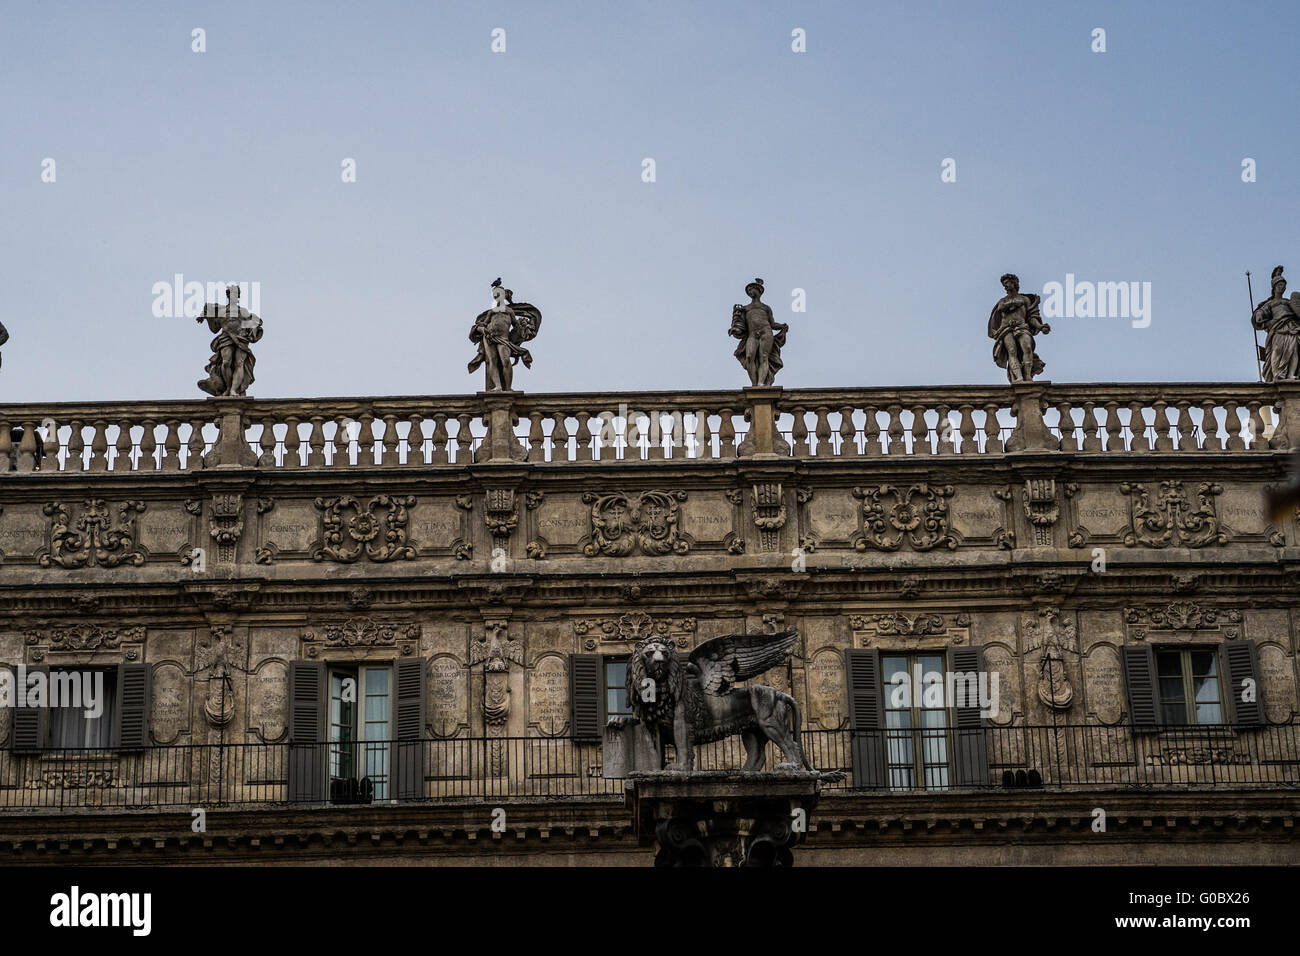 Human Statue on Top of Architectural Old Building Stock Photo